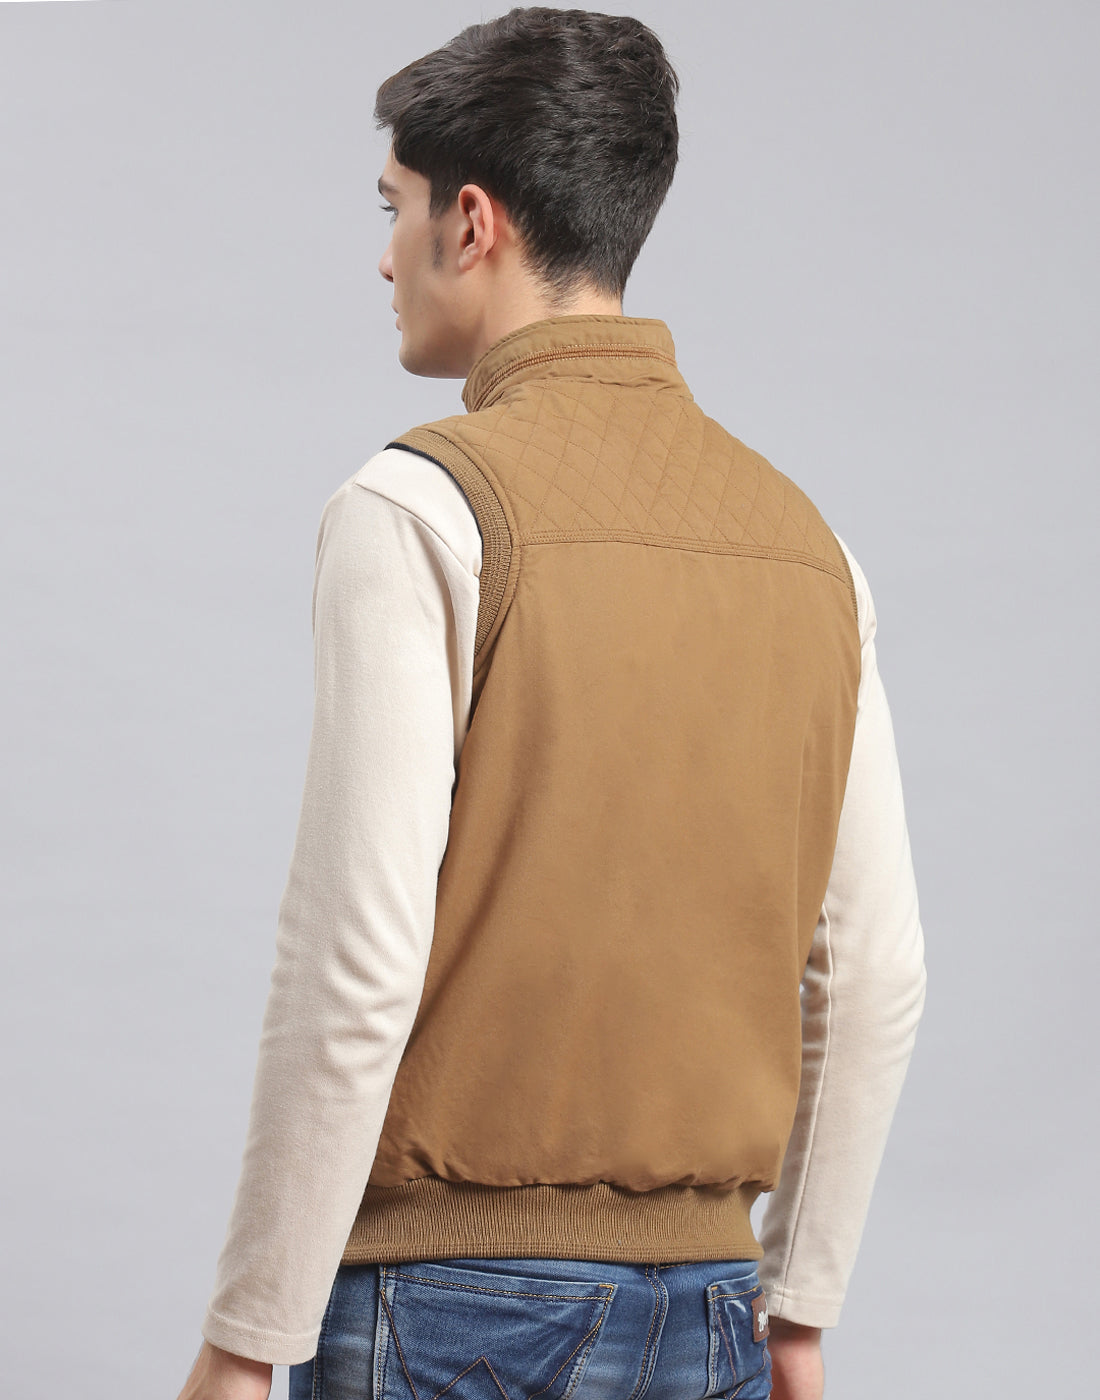 Men Brown Solid Stand Collar Sleeveless Jacket